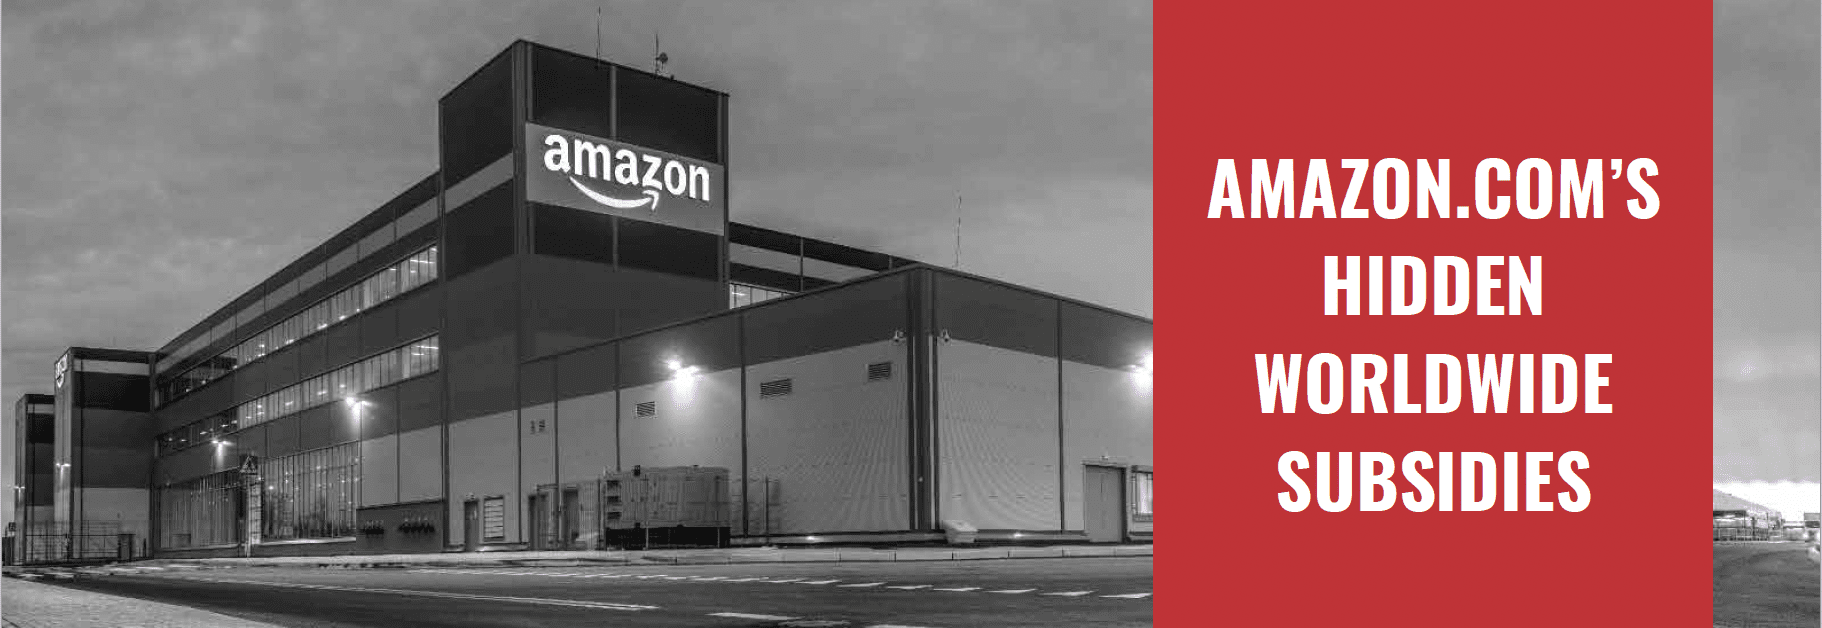 Cover shows Amazon facility and the words, "Amazon.com's Hidden Worldwide Subsidies"